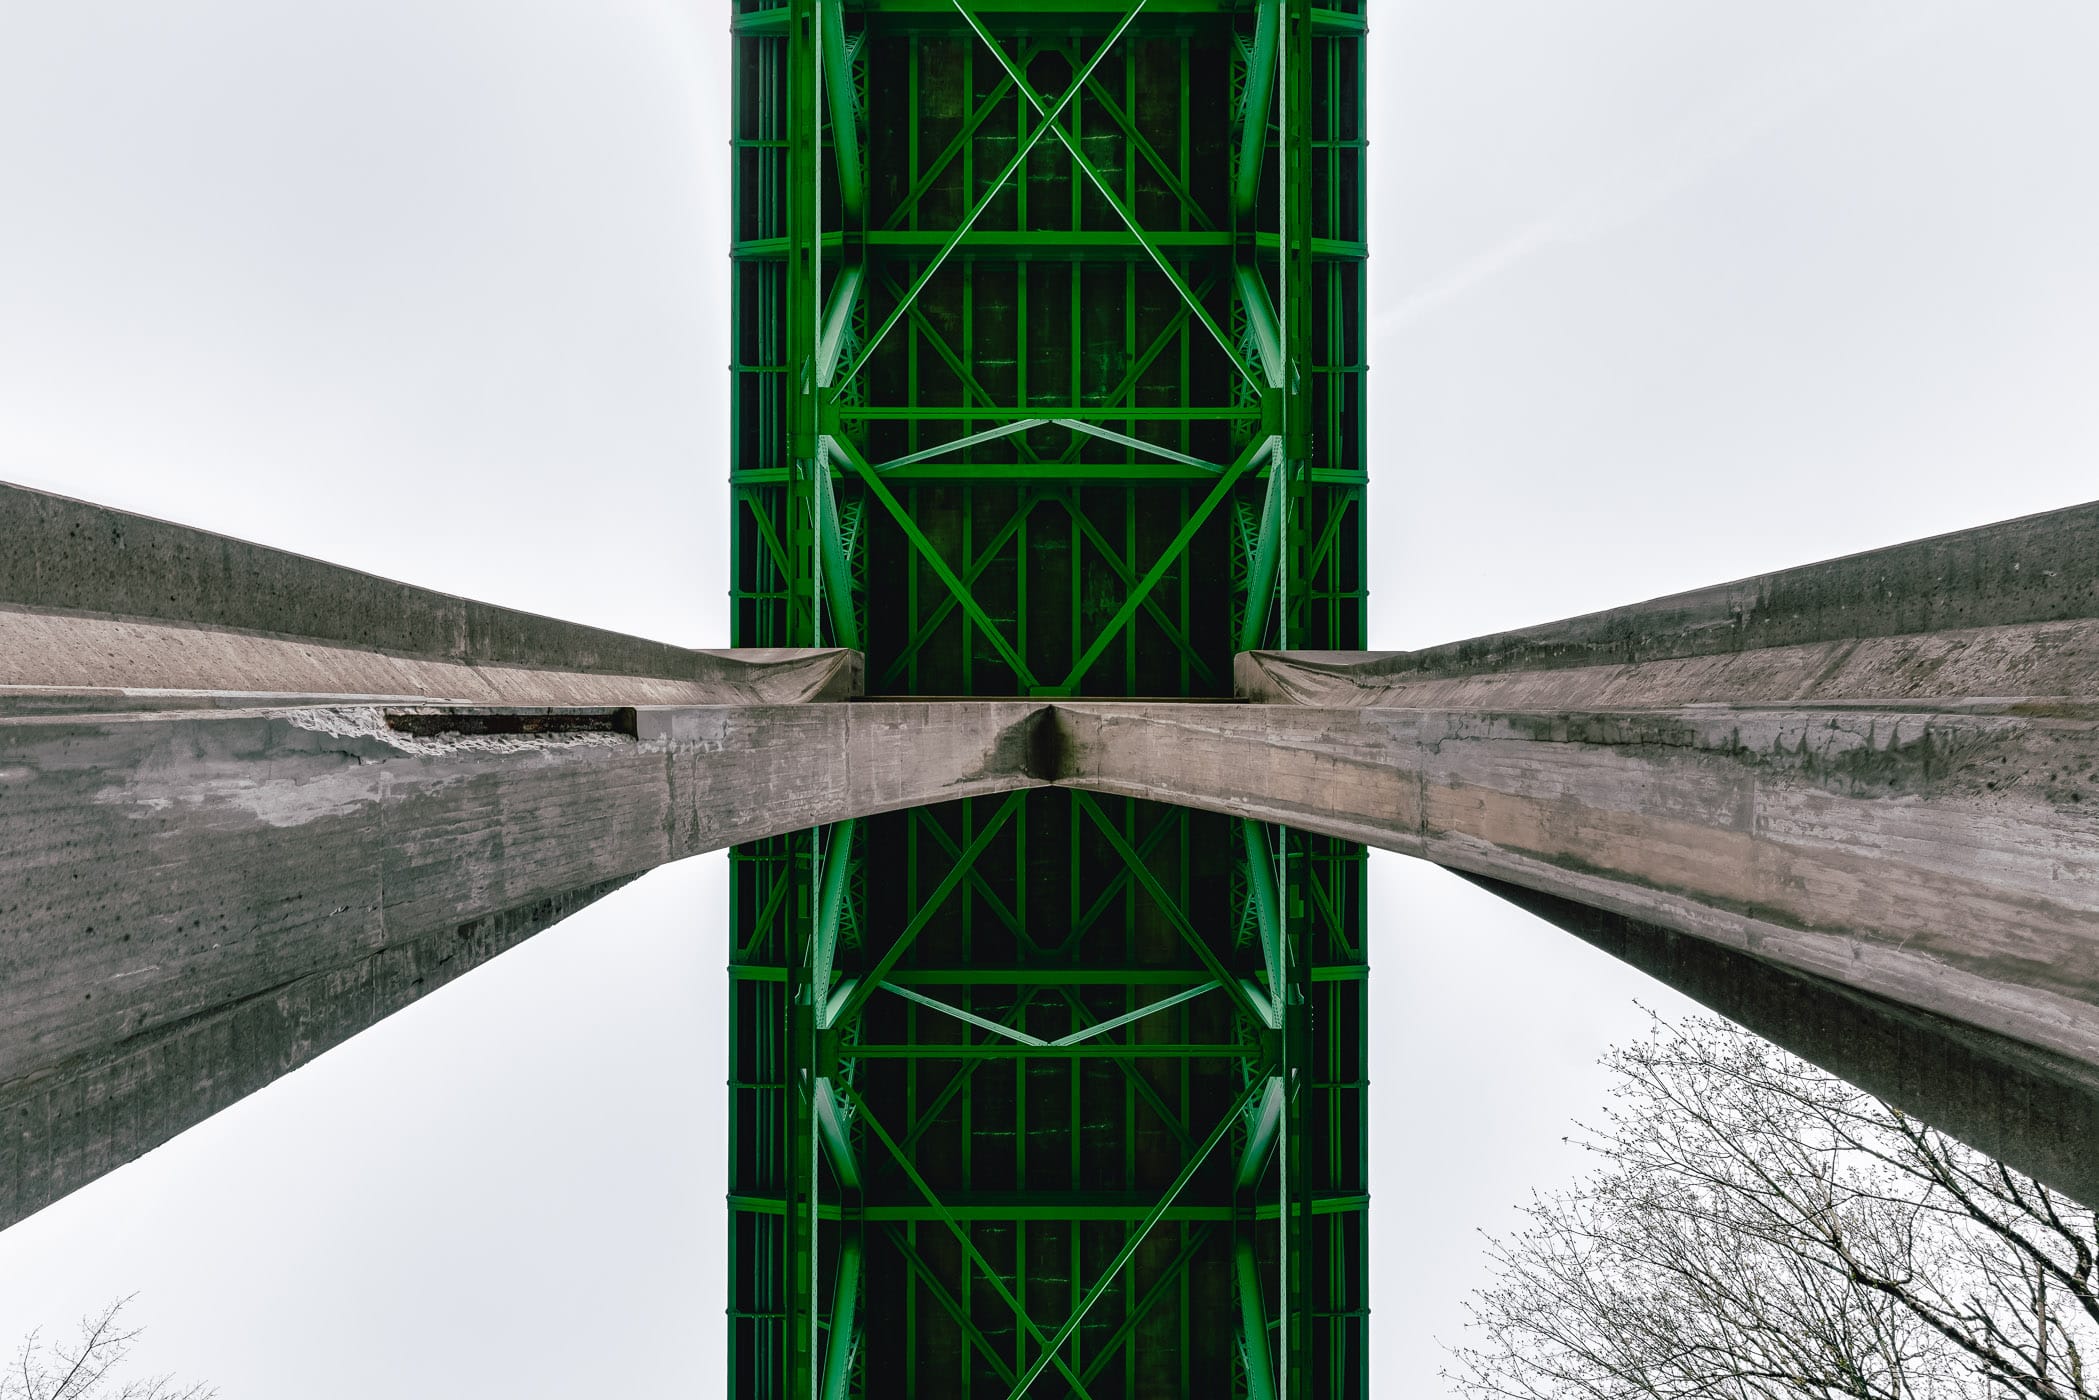 Detail of Portland, Oregon's St. Johns Bridge as it arches over Cathedral Park.